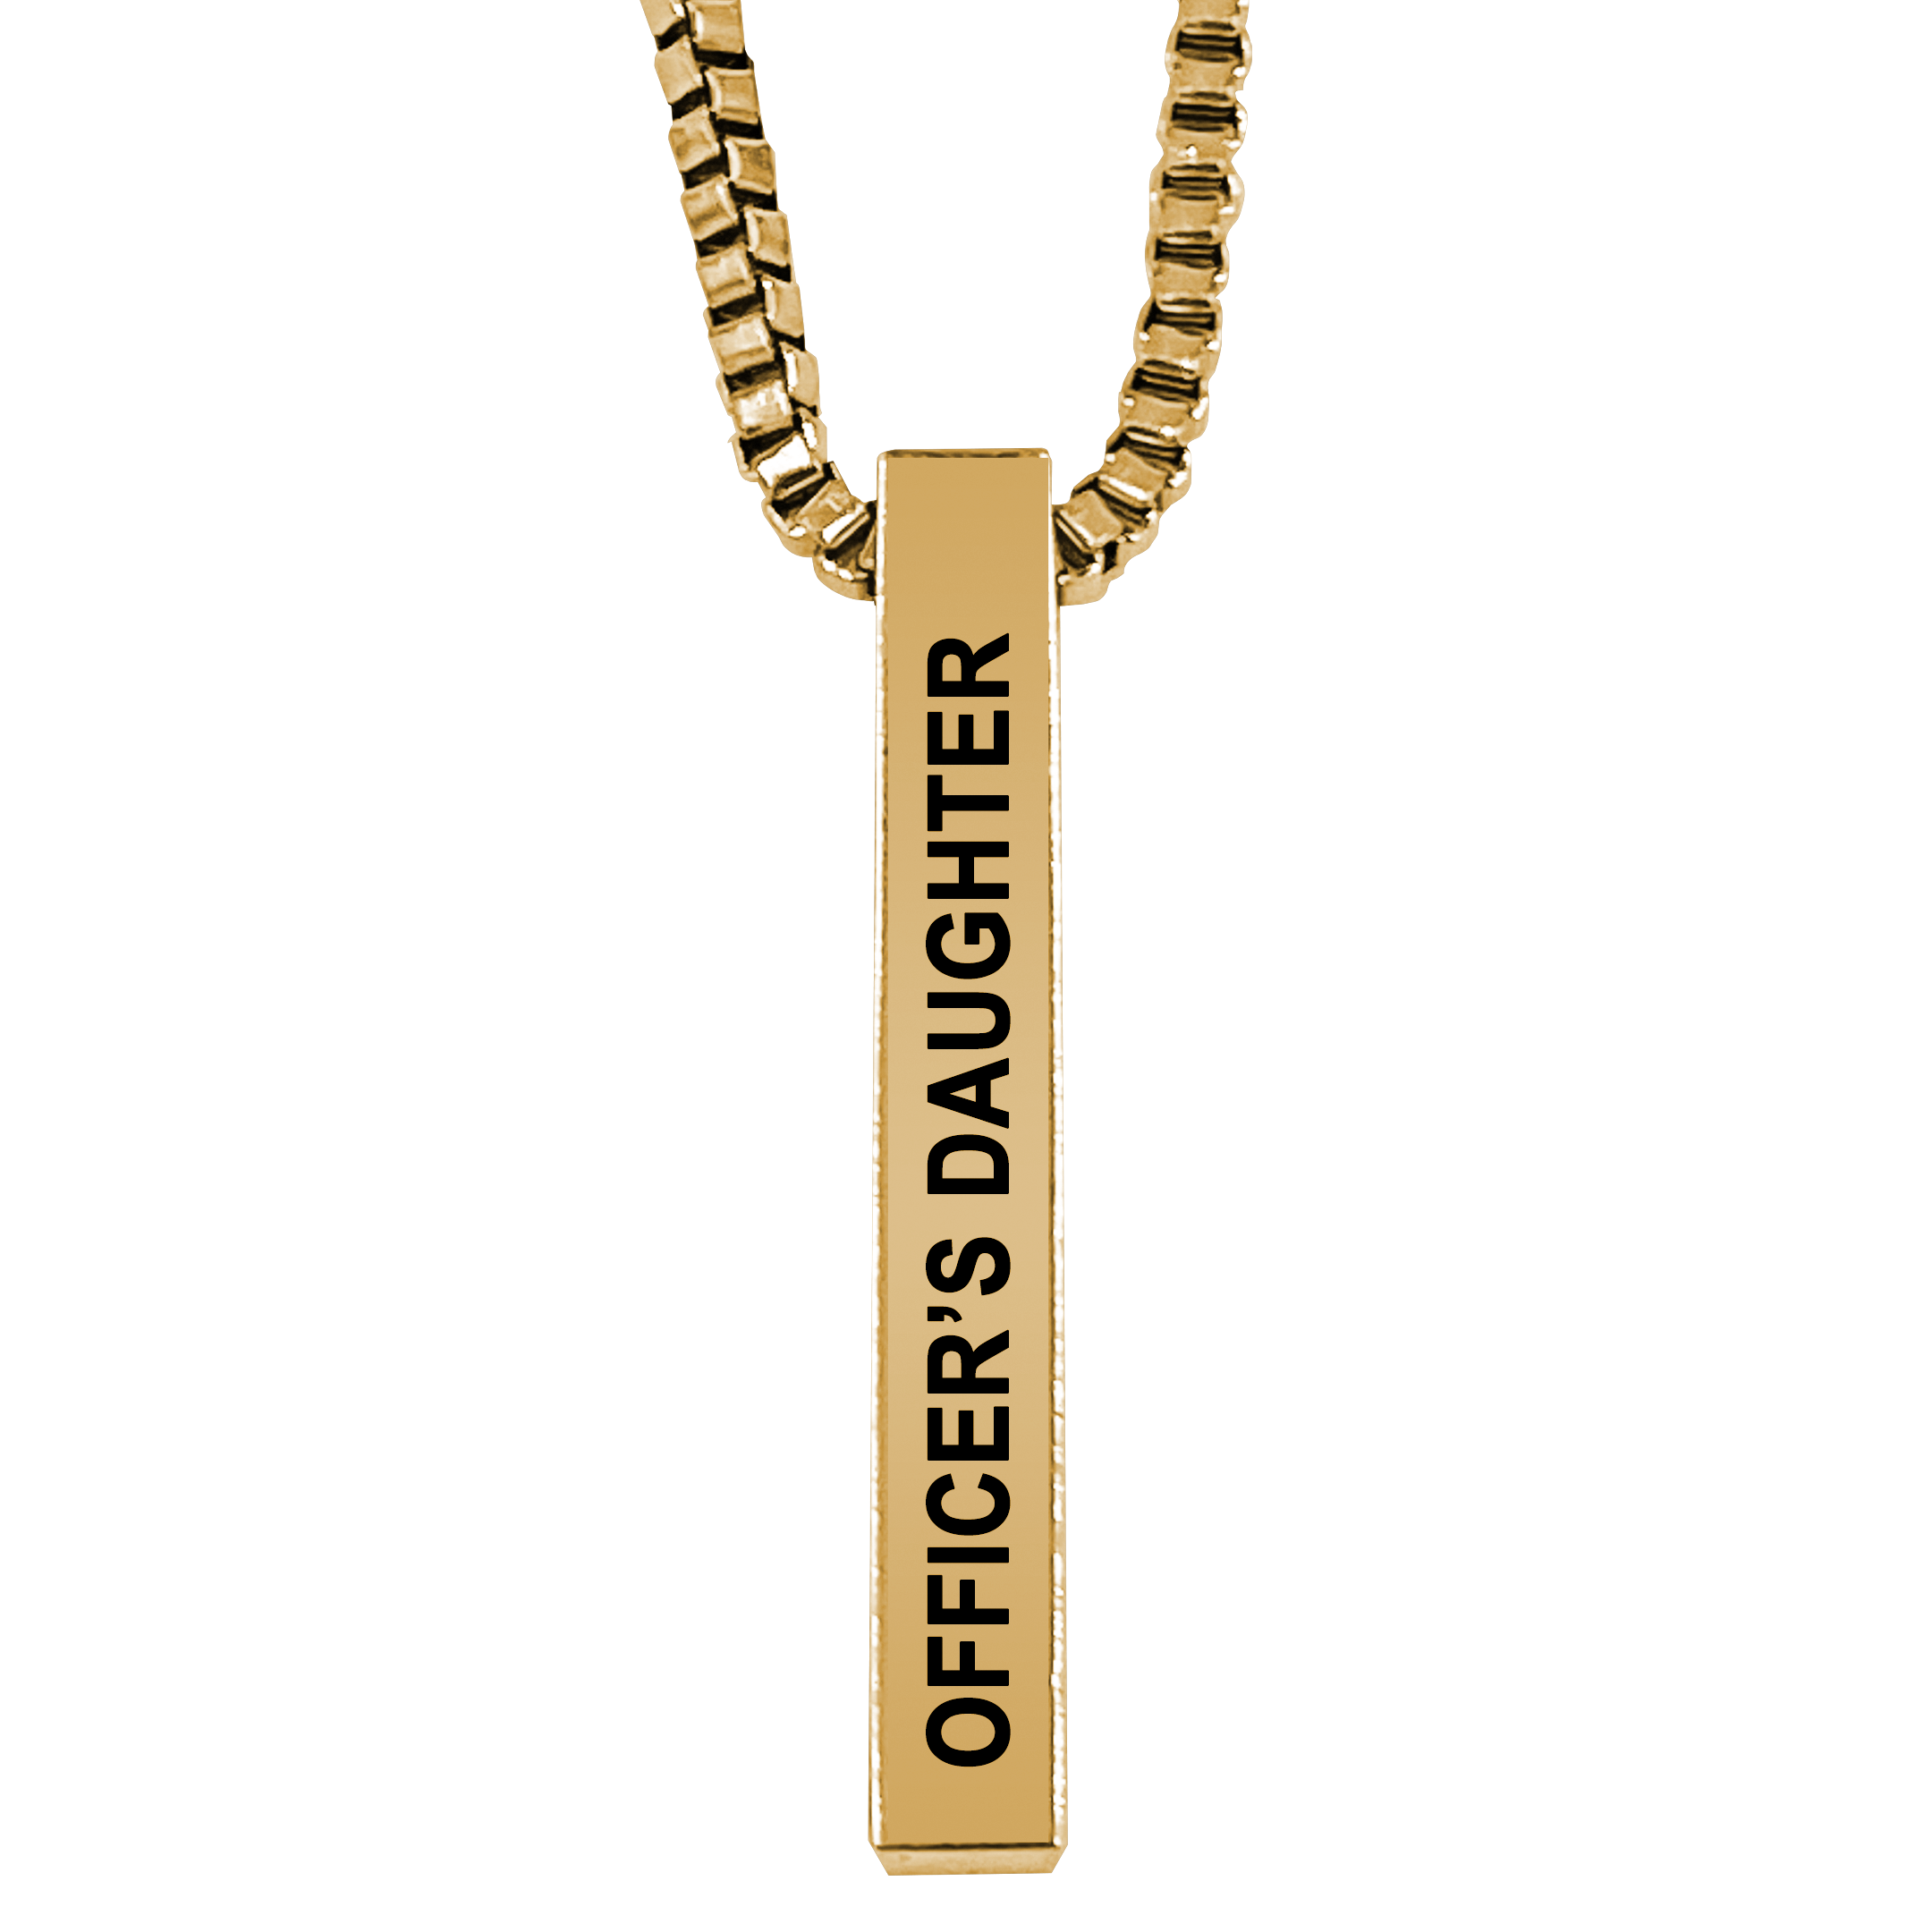 Officer's Daughter Gold Plated Pillar Bar Pendant Necklace Gift Mother's Day Christmas Holiday Anniversary Police Sheriff Officer First Responder Law Enforcement